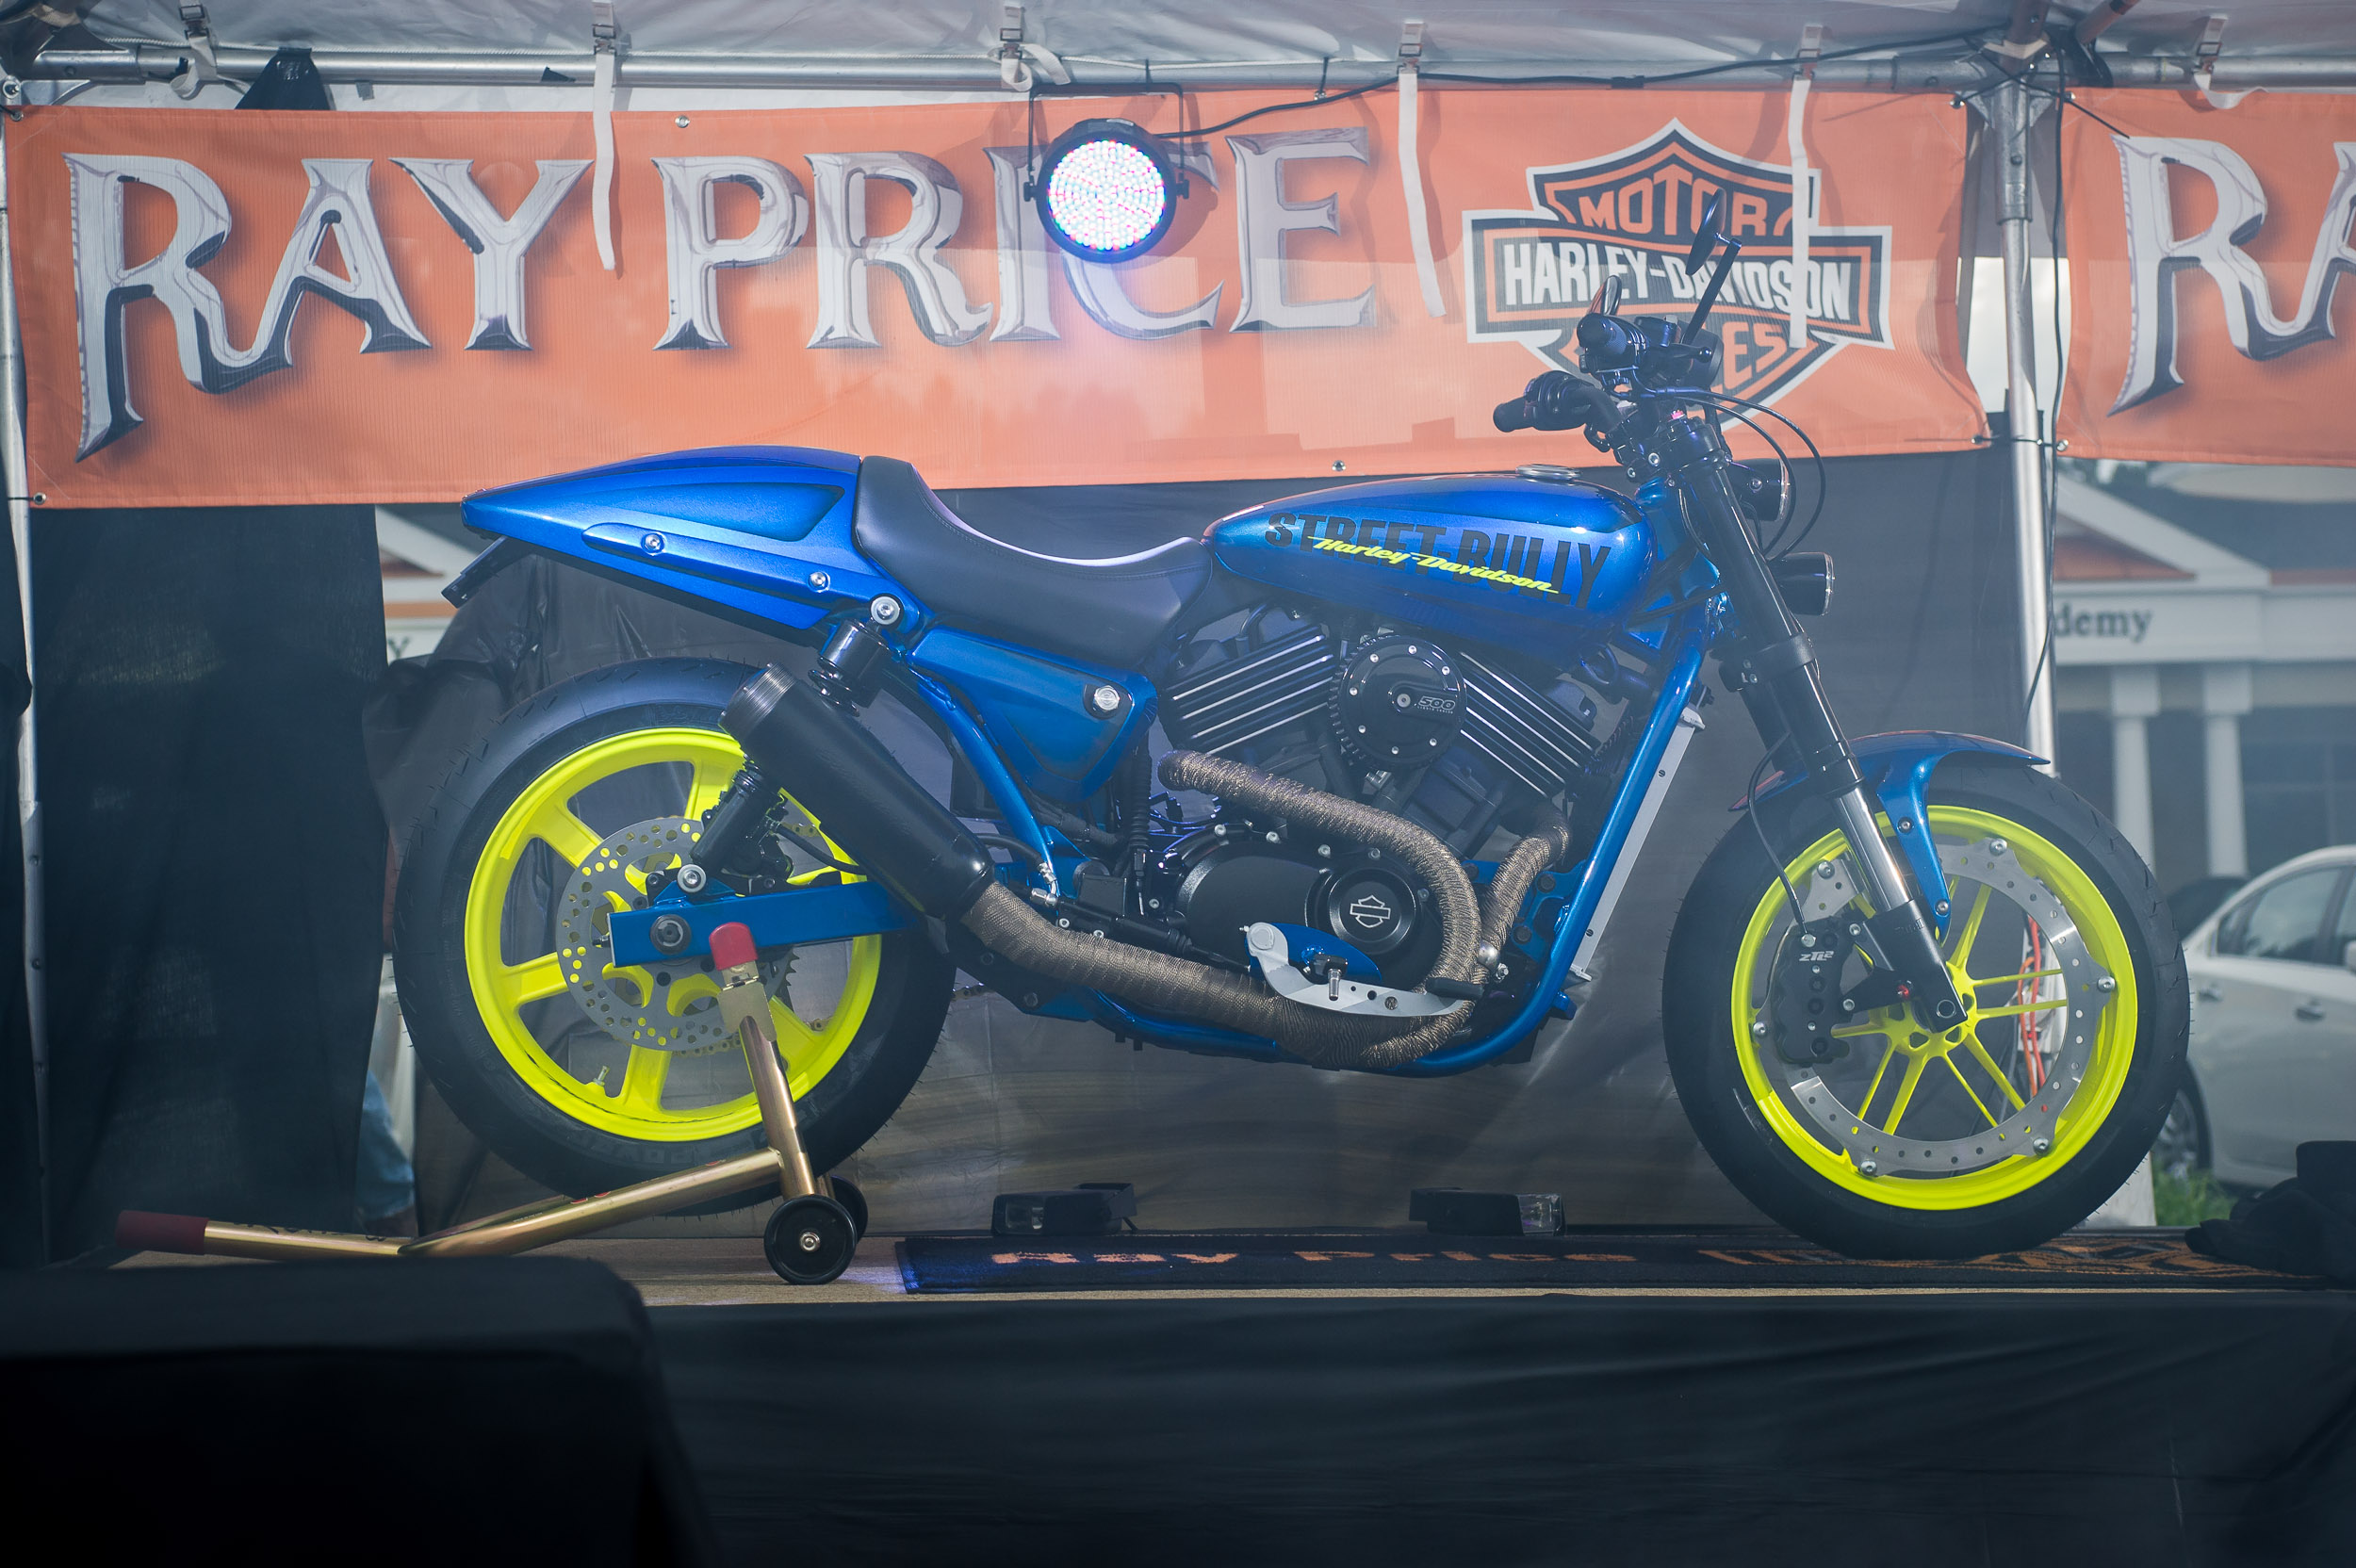 Ray Price Harley-Davidson reveals its customized Street 750 for Harley's Custom Kings competition.